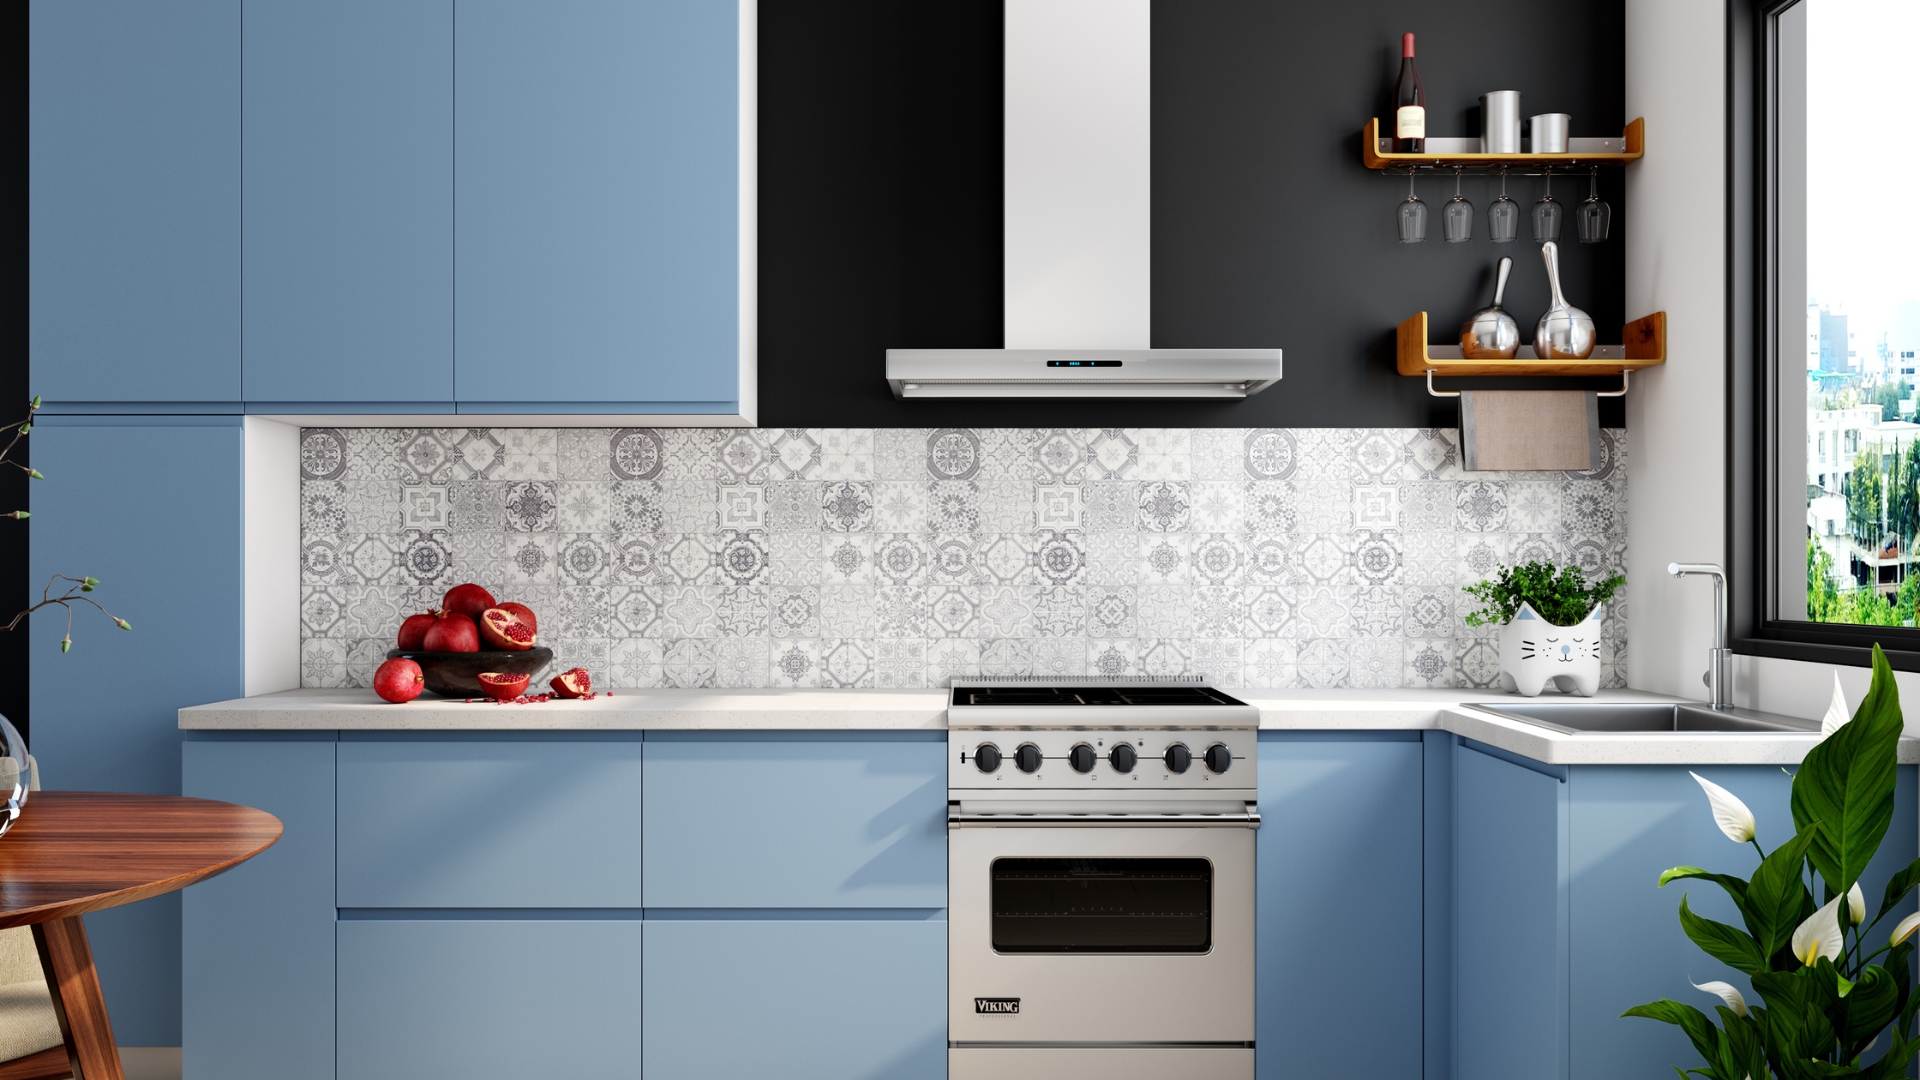 Convenient and easy-to-use peel and stick kitchen backsplash for easy backsplash ideas